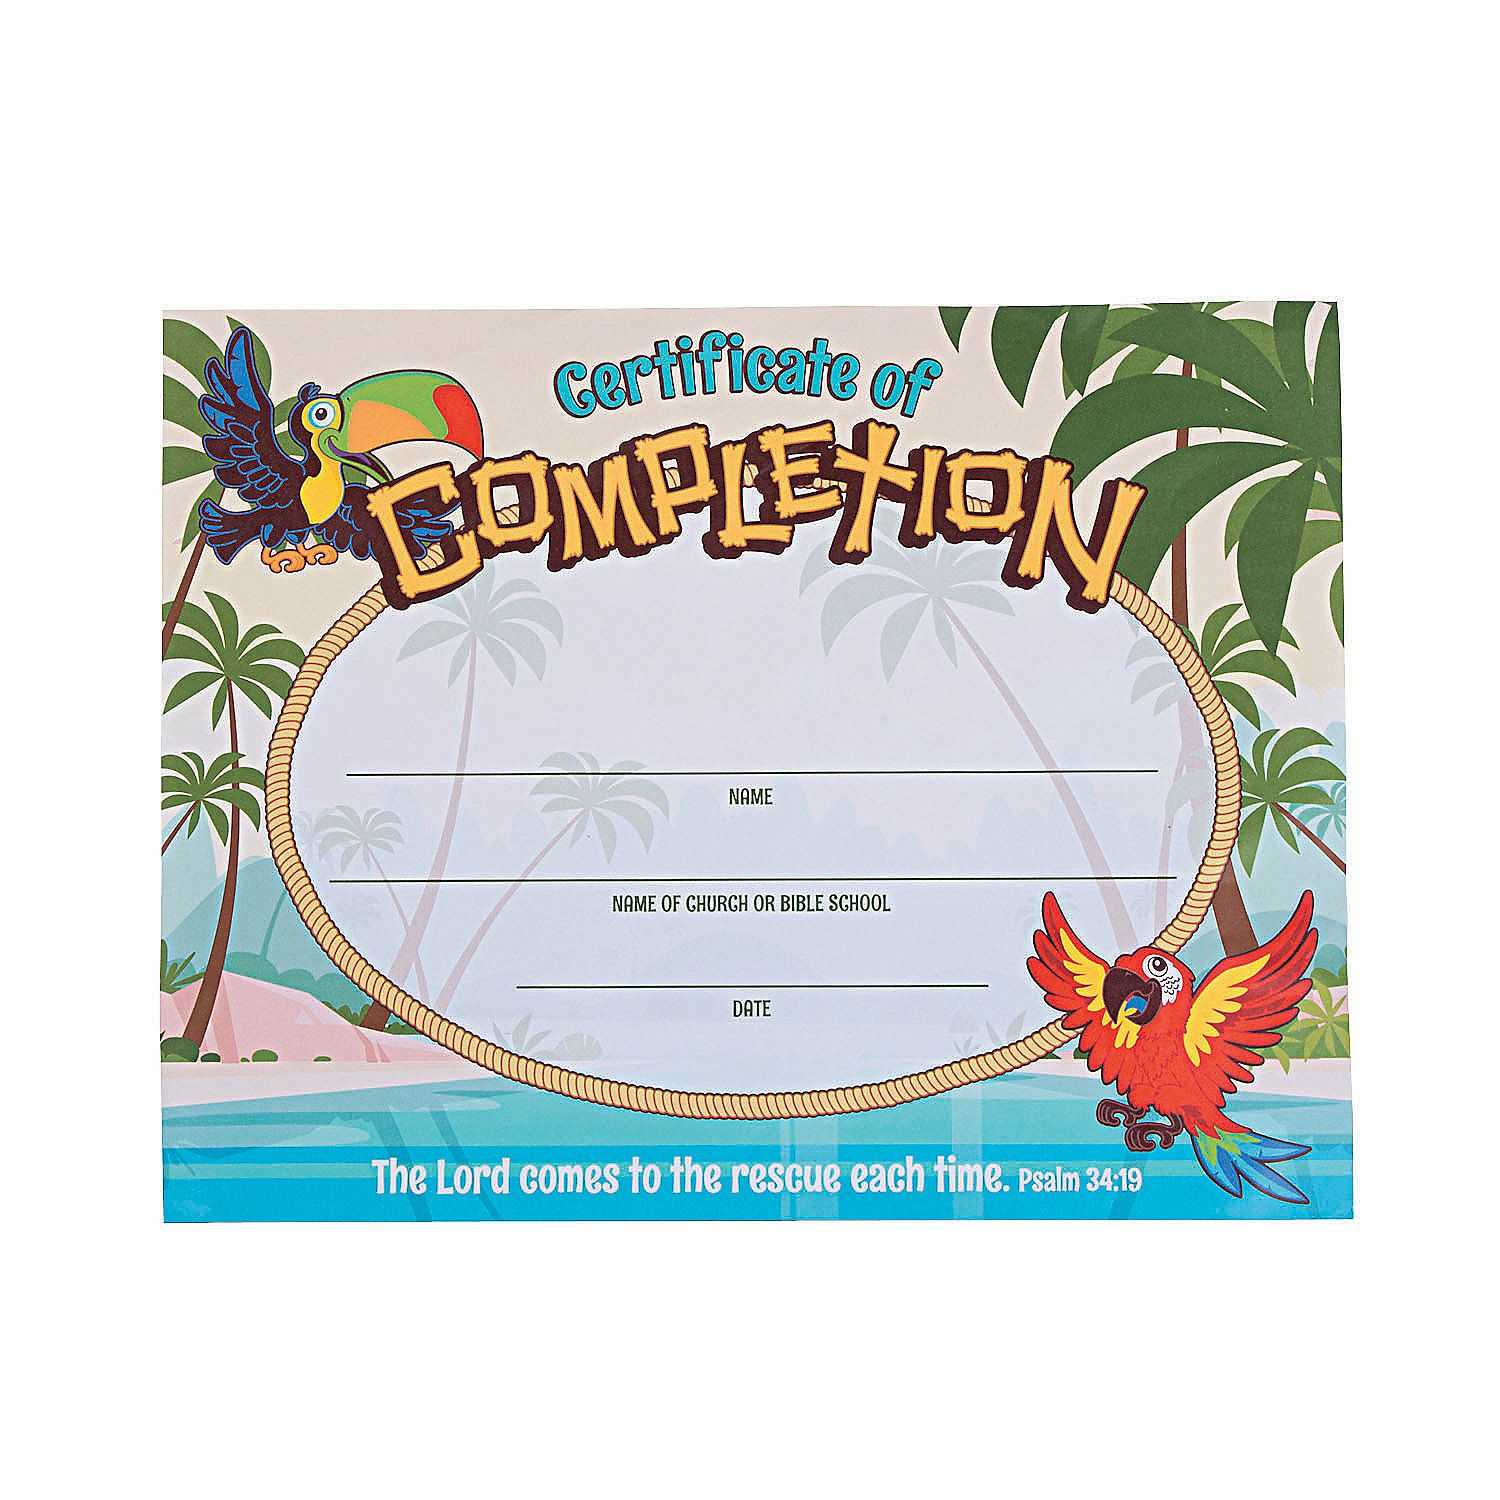 Island Vbs Certificates Of Completion | Certificate Of Within Free Vbs Certificate Templates